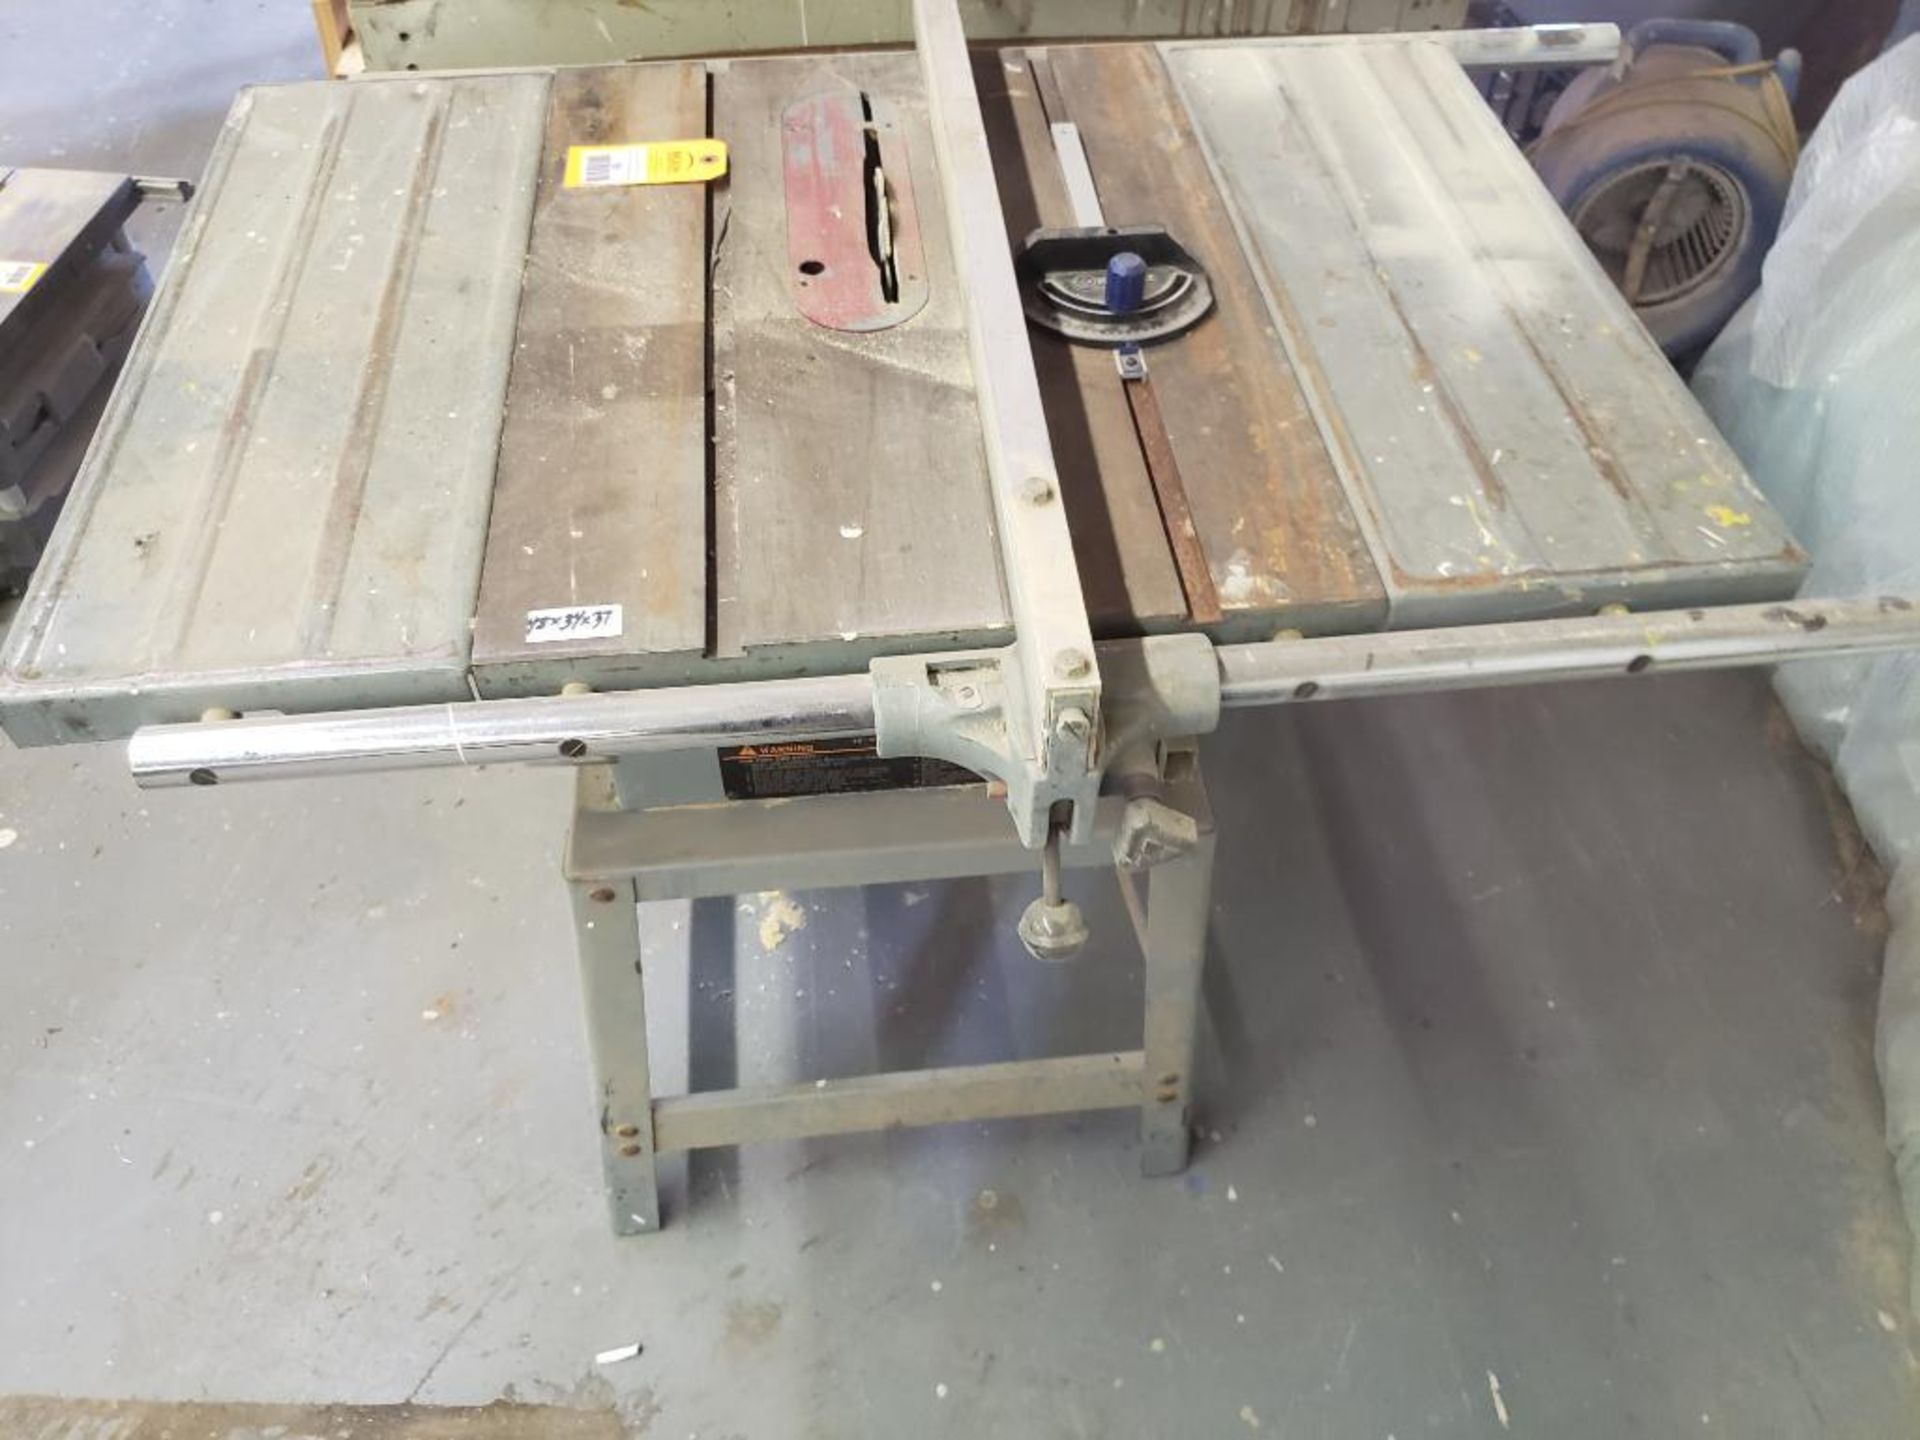 10" Delta table saw.